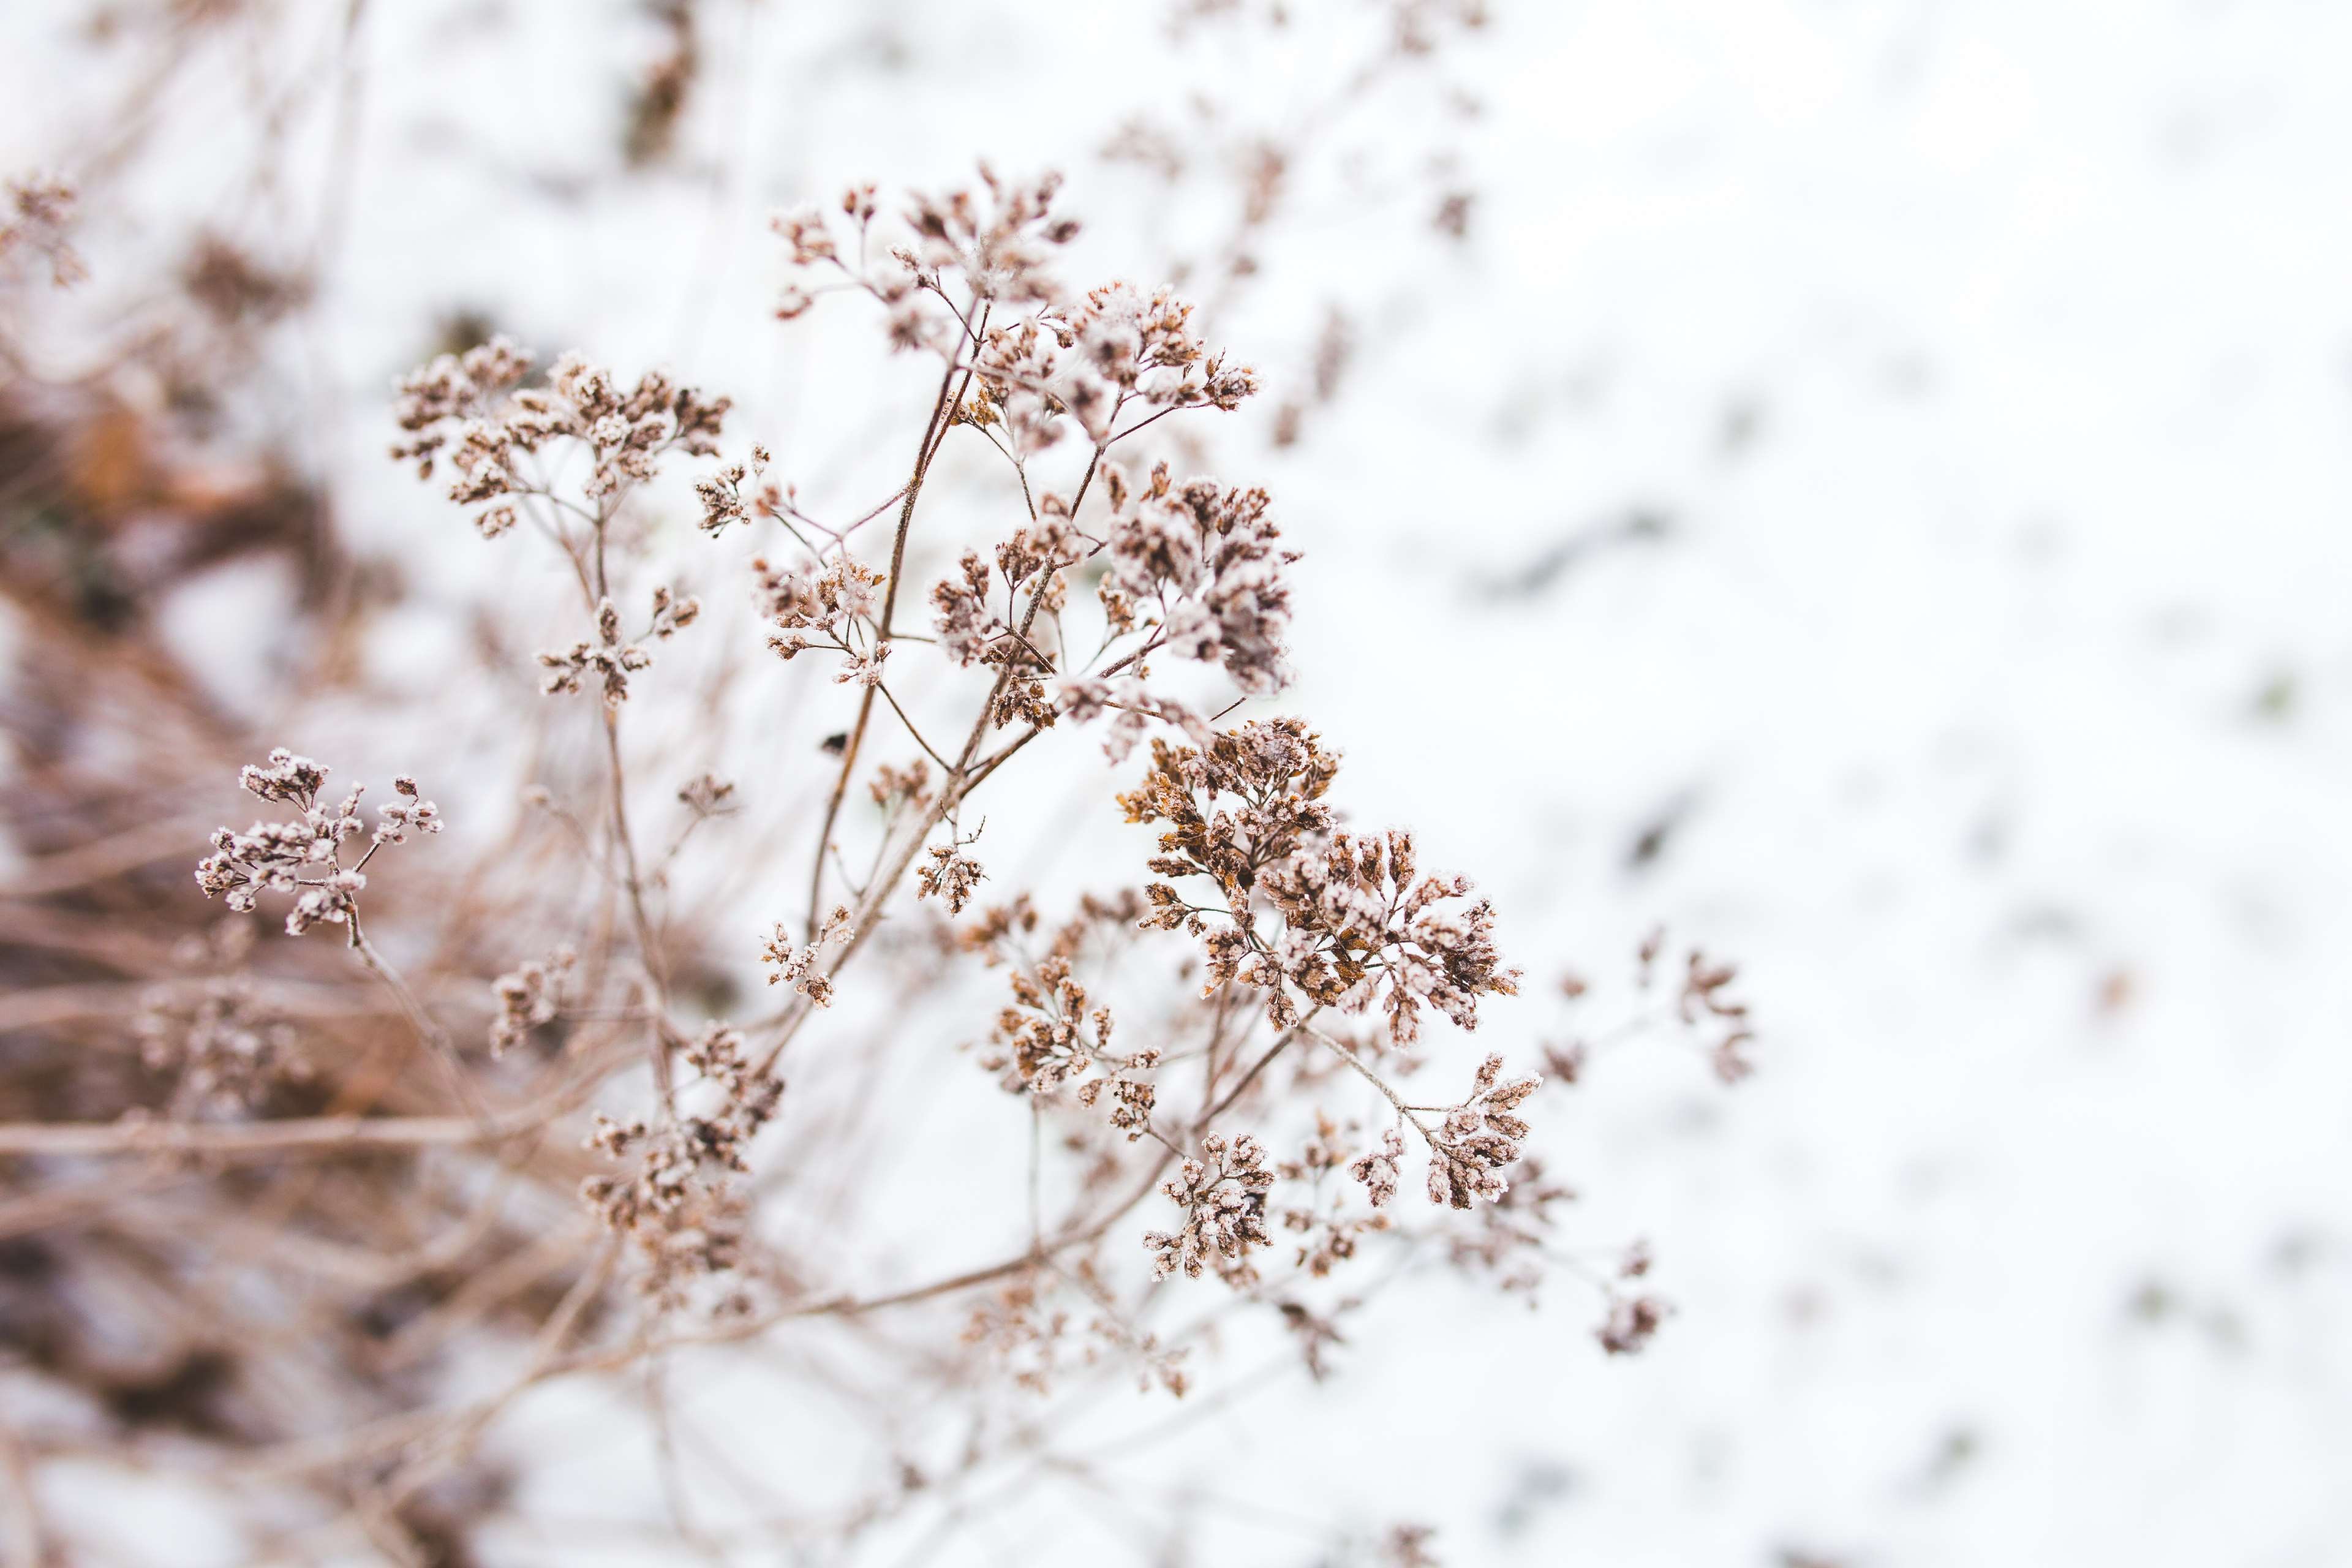 detail, dried, flower, flowers, little, nature, small, withered 4k wallpaper. Mocah HD Wallpaper